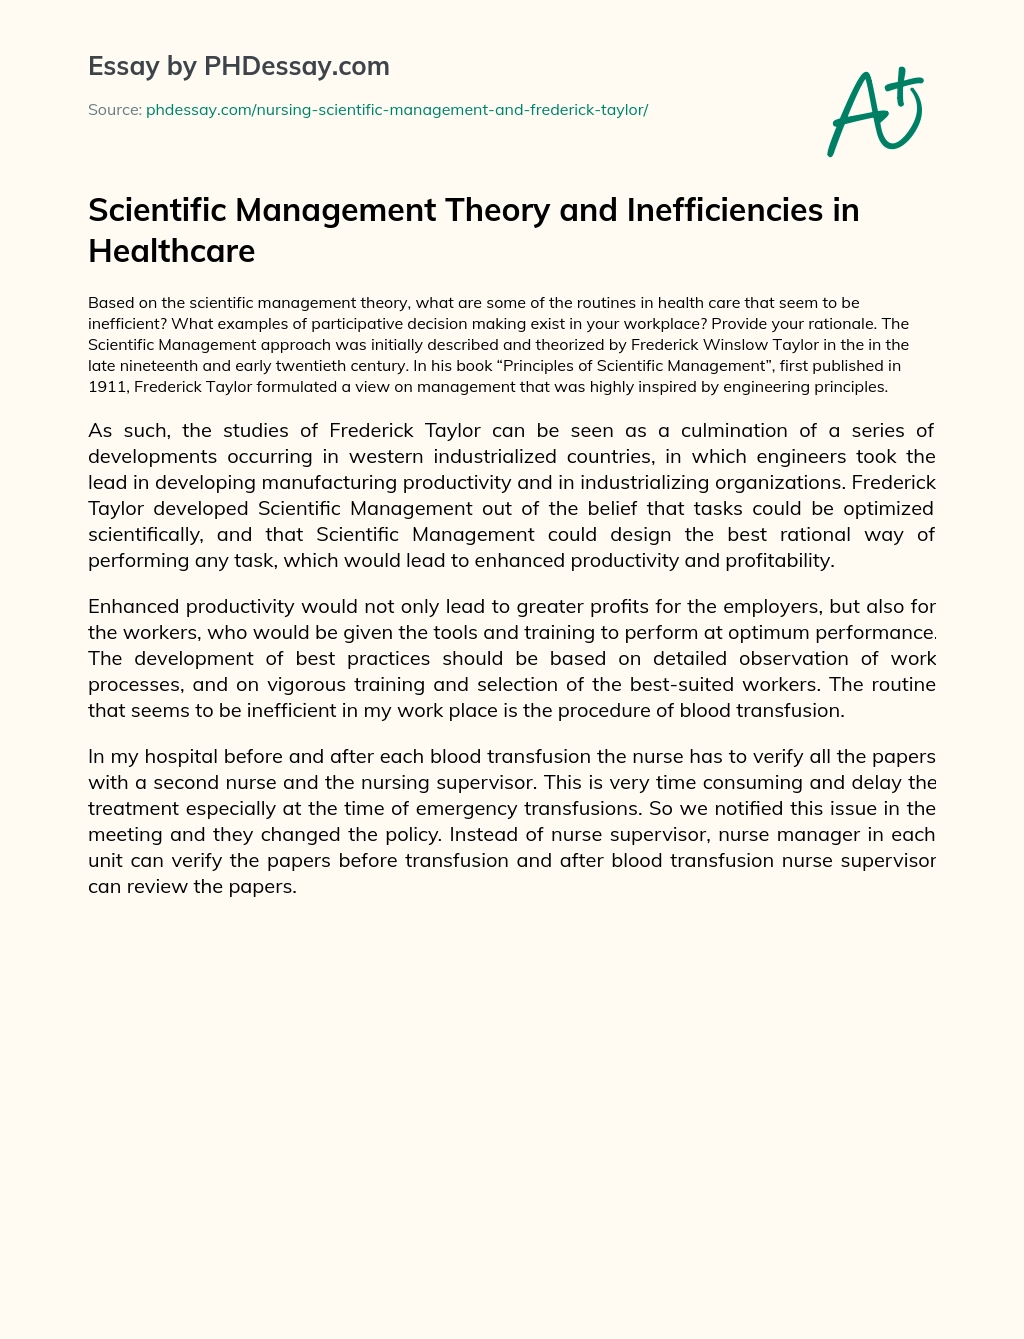 Scientific Management Theory and Inefficiencies in Healthcare essay